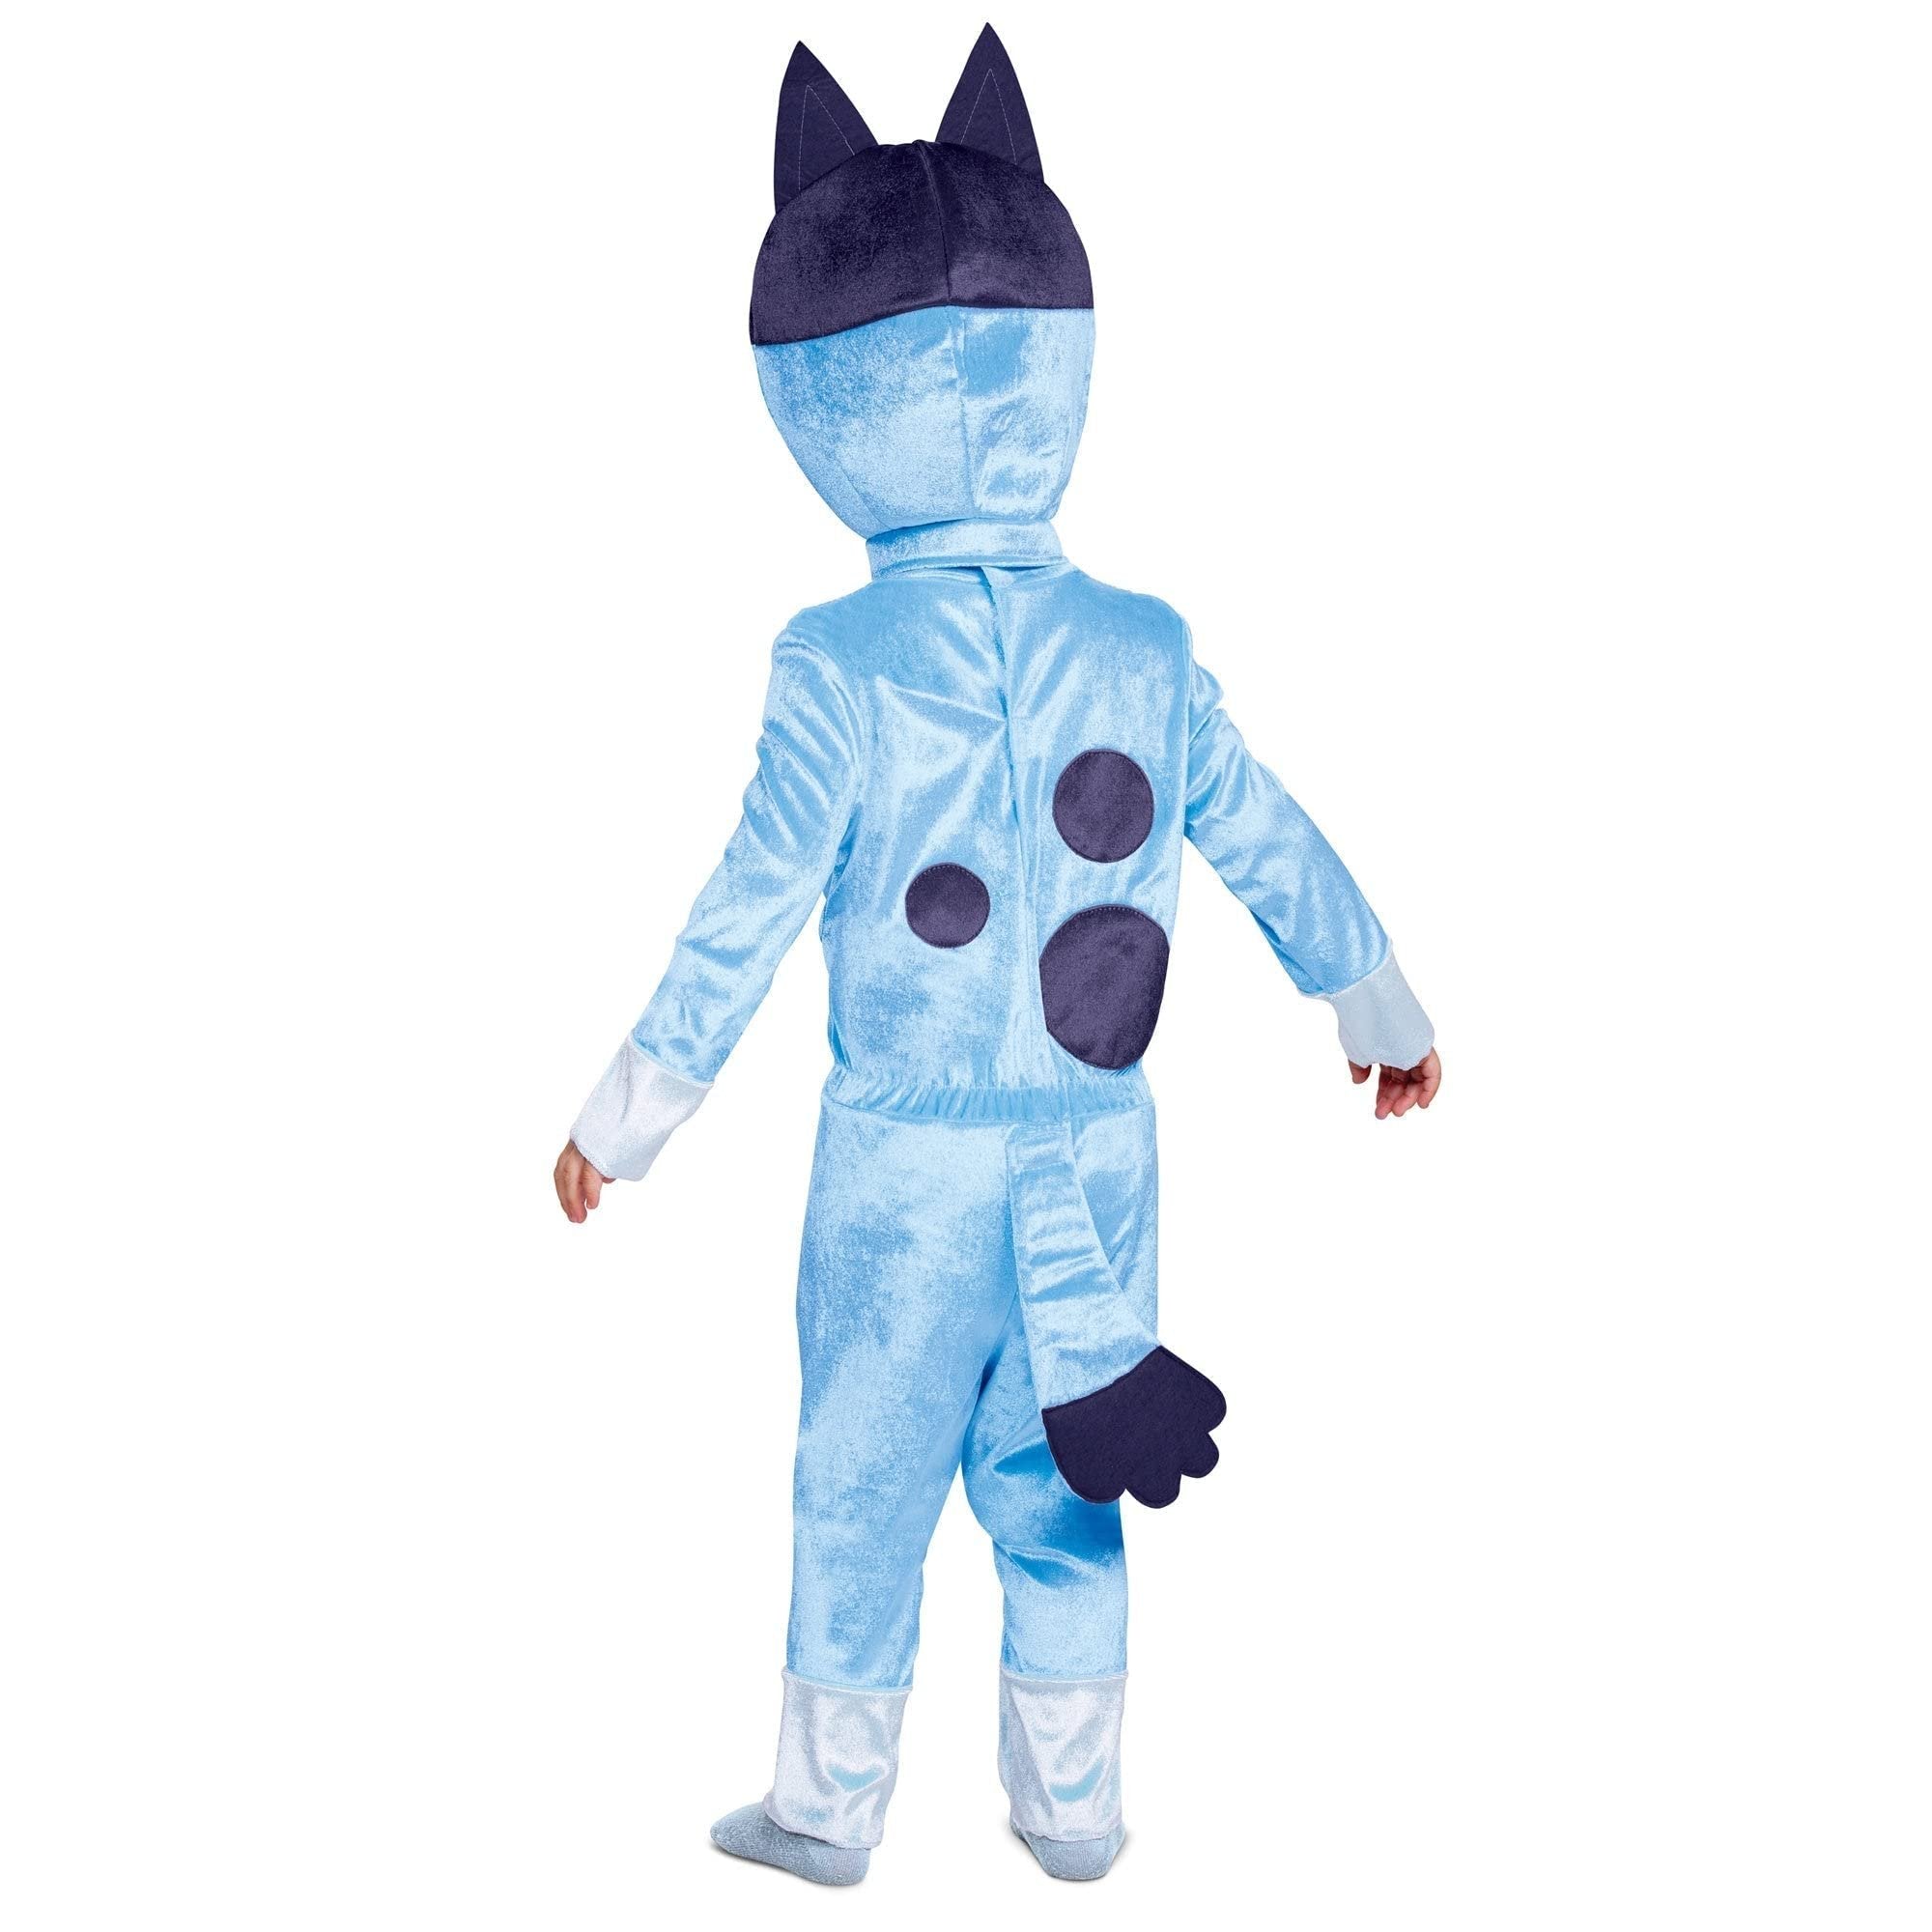 Disguise Bluey Costume for Kids, Official Bluey Character Outfit with Jumpsuit and Mask, Classic Toddler Size Medium (3T-4T)